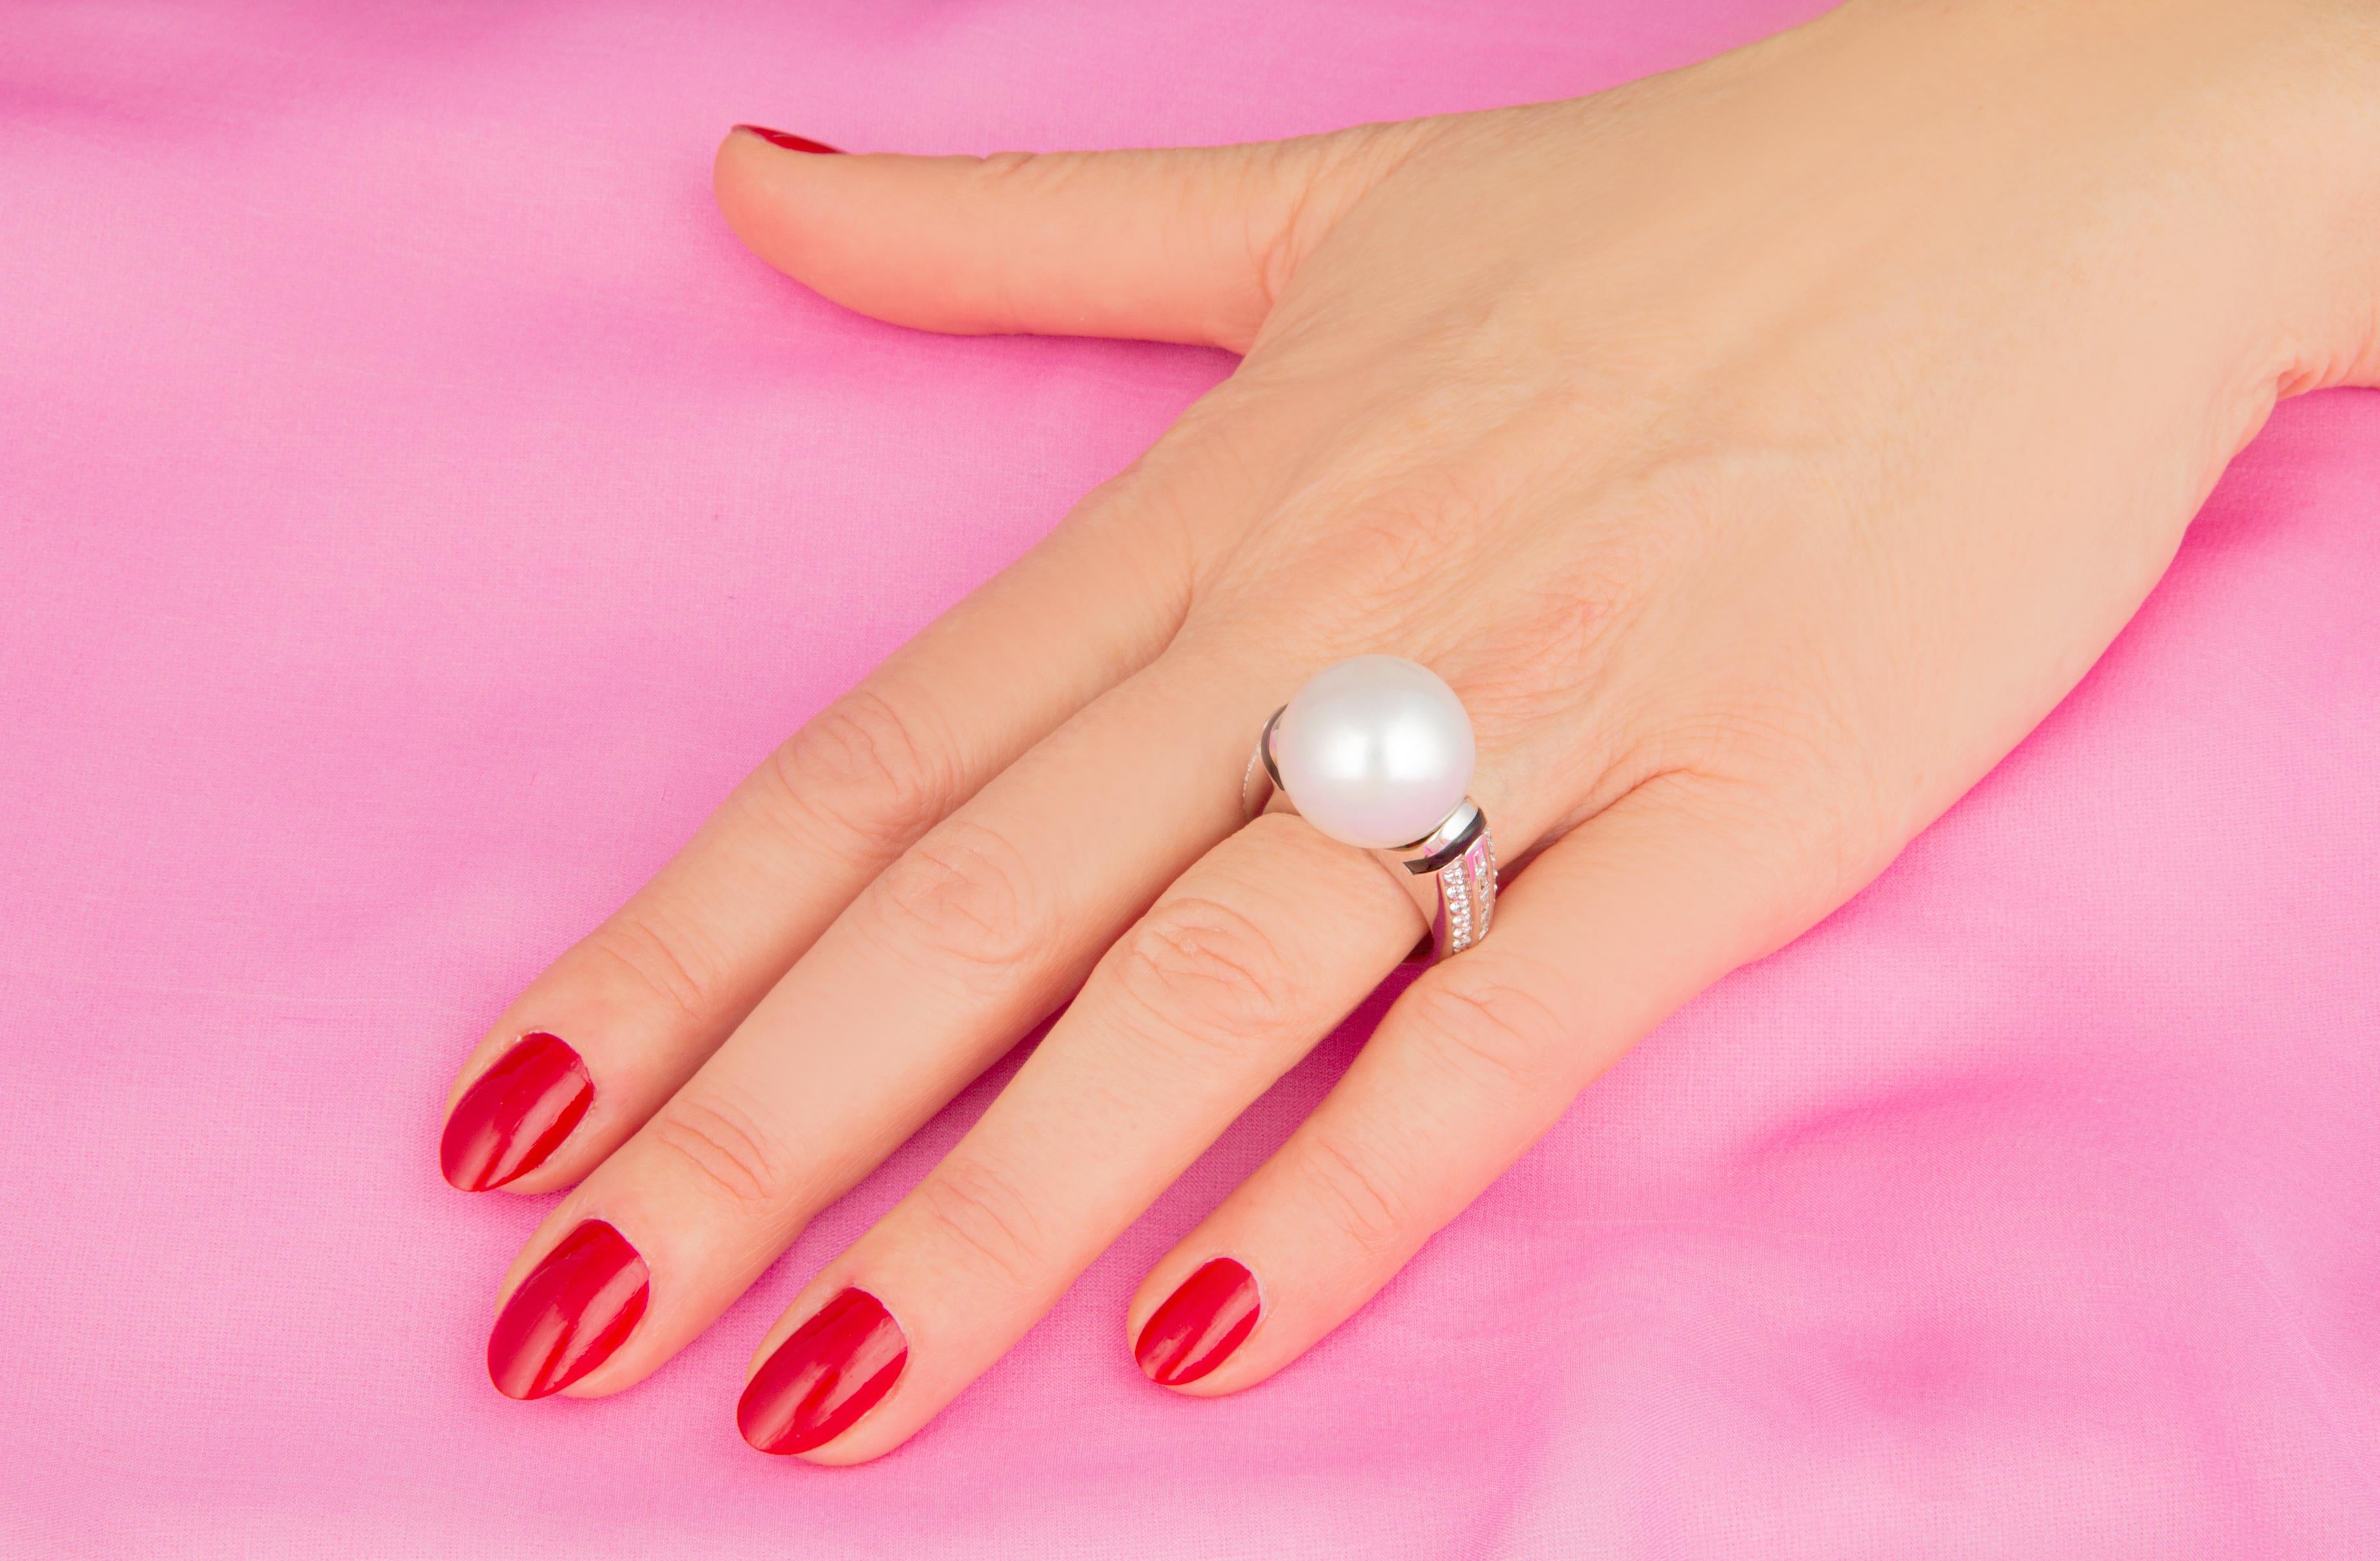 This South Sea pearl and diamond cocktail ring features a pearl of 17mm diameter. The pearl is untreated. It displays a fine nacre and its natural color and luster have not been enhanced in any way. The pearl is highly exposed in a symmetrical ring